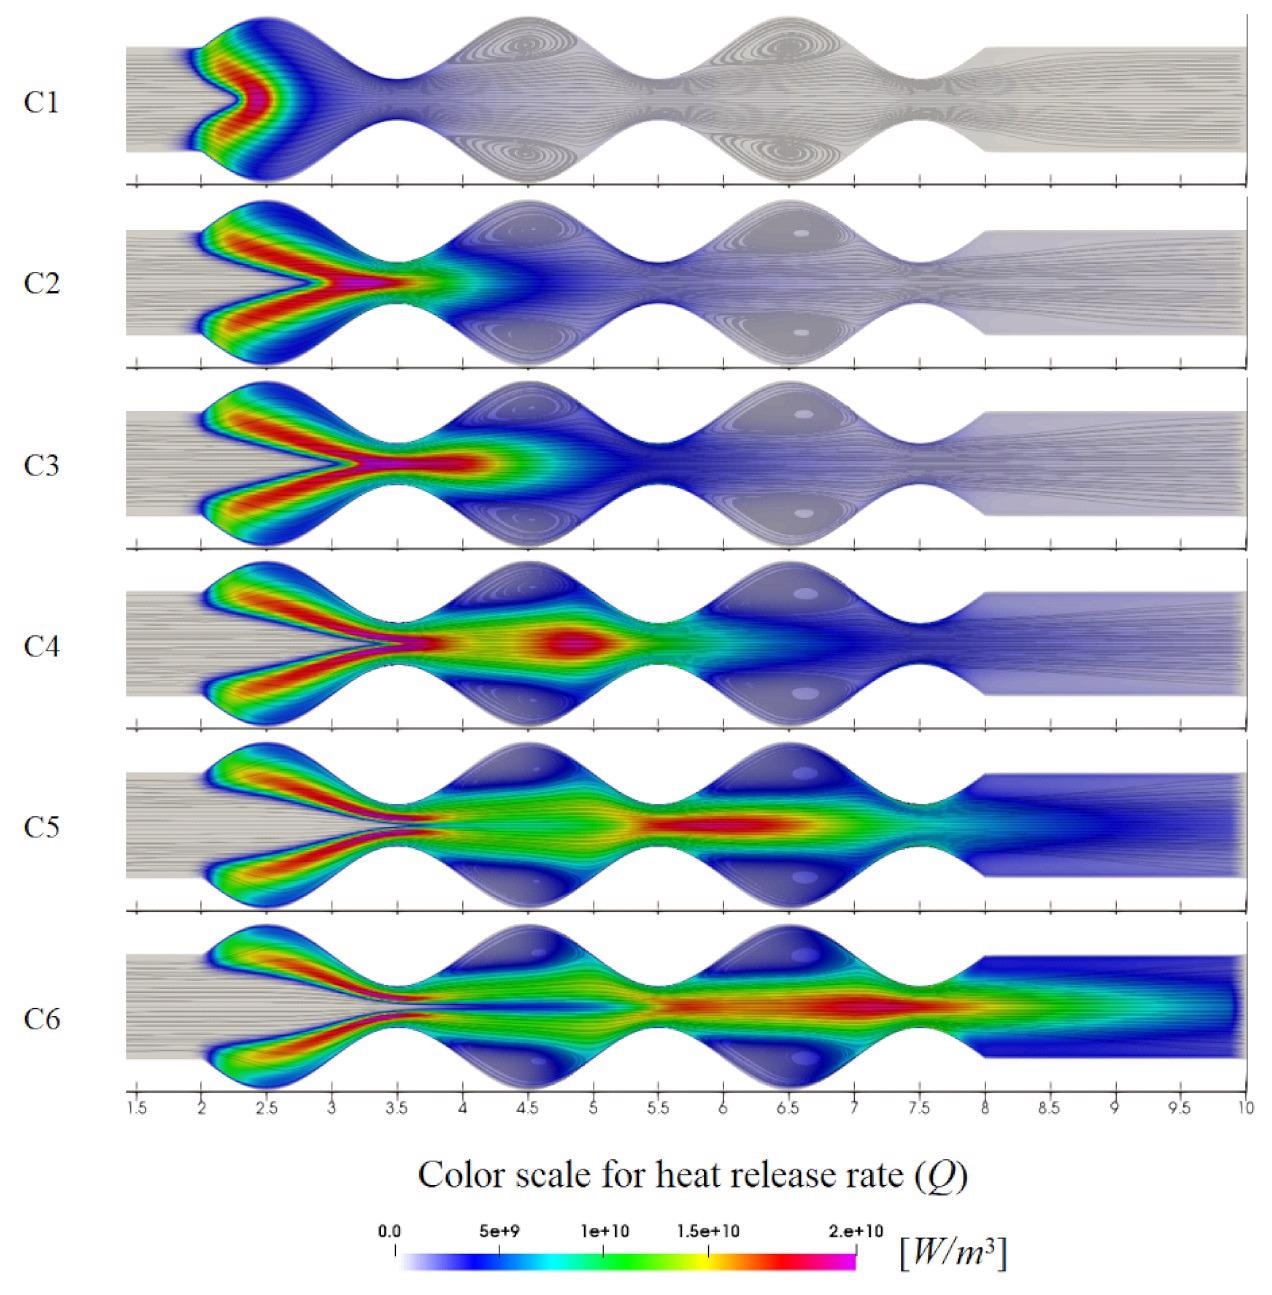 Contour maps for the streamlines superimposed on heat release rate distribution for different cases.